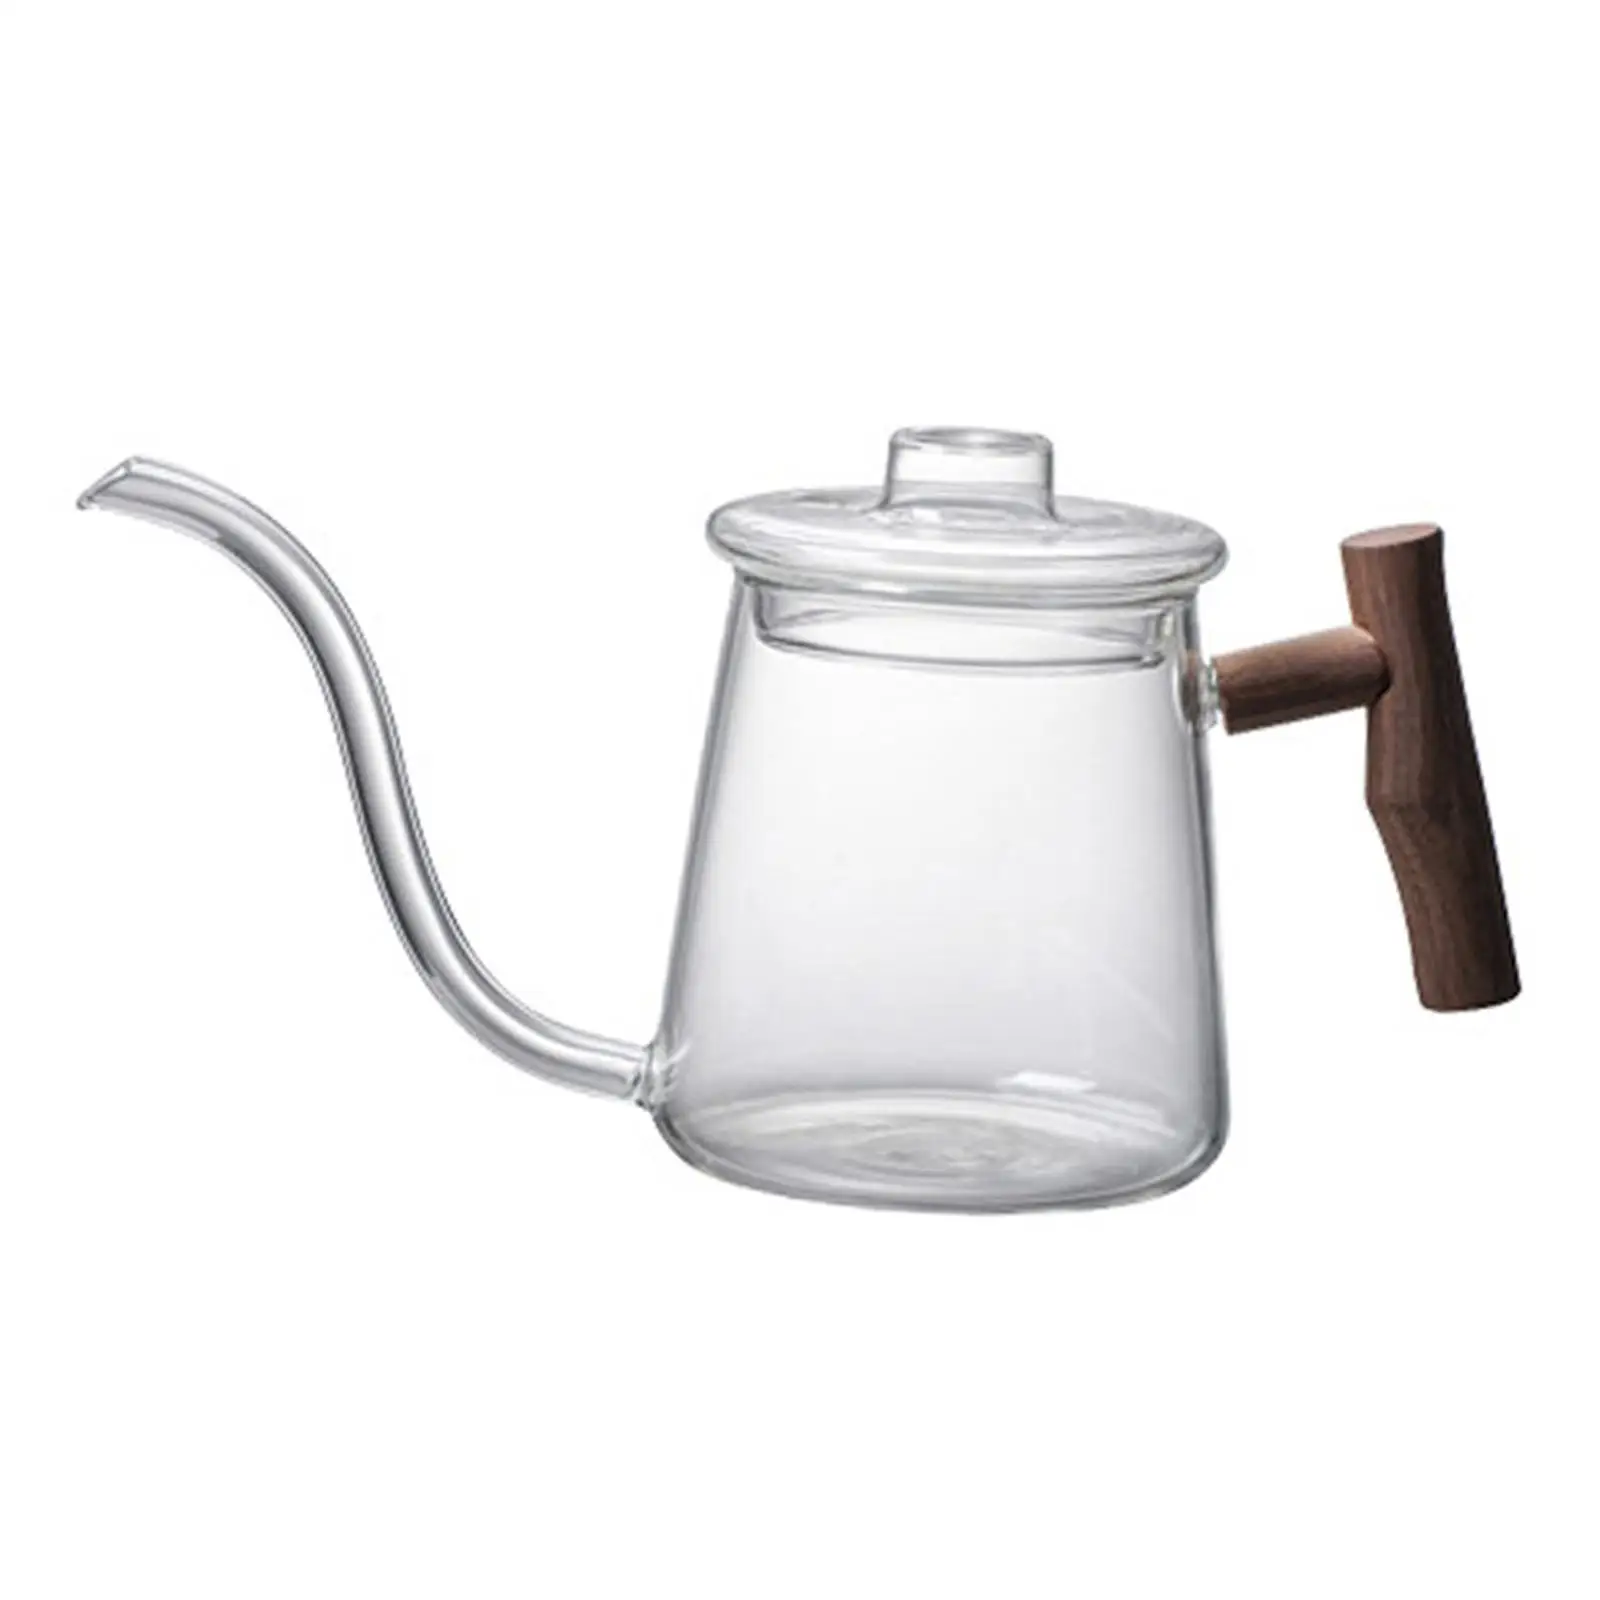 Pour Over Kettle Ergonomic Wooden Handle with Lid Stovetop Gooseneck Kettle for